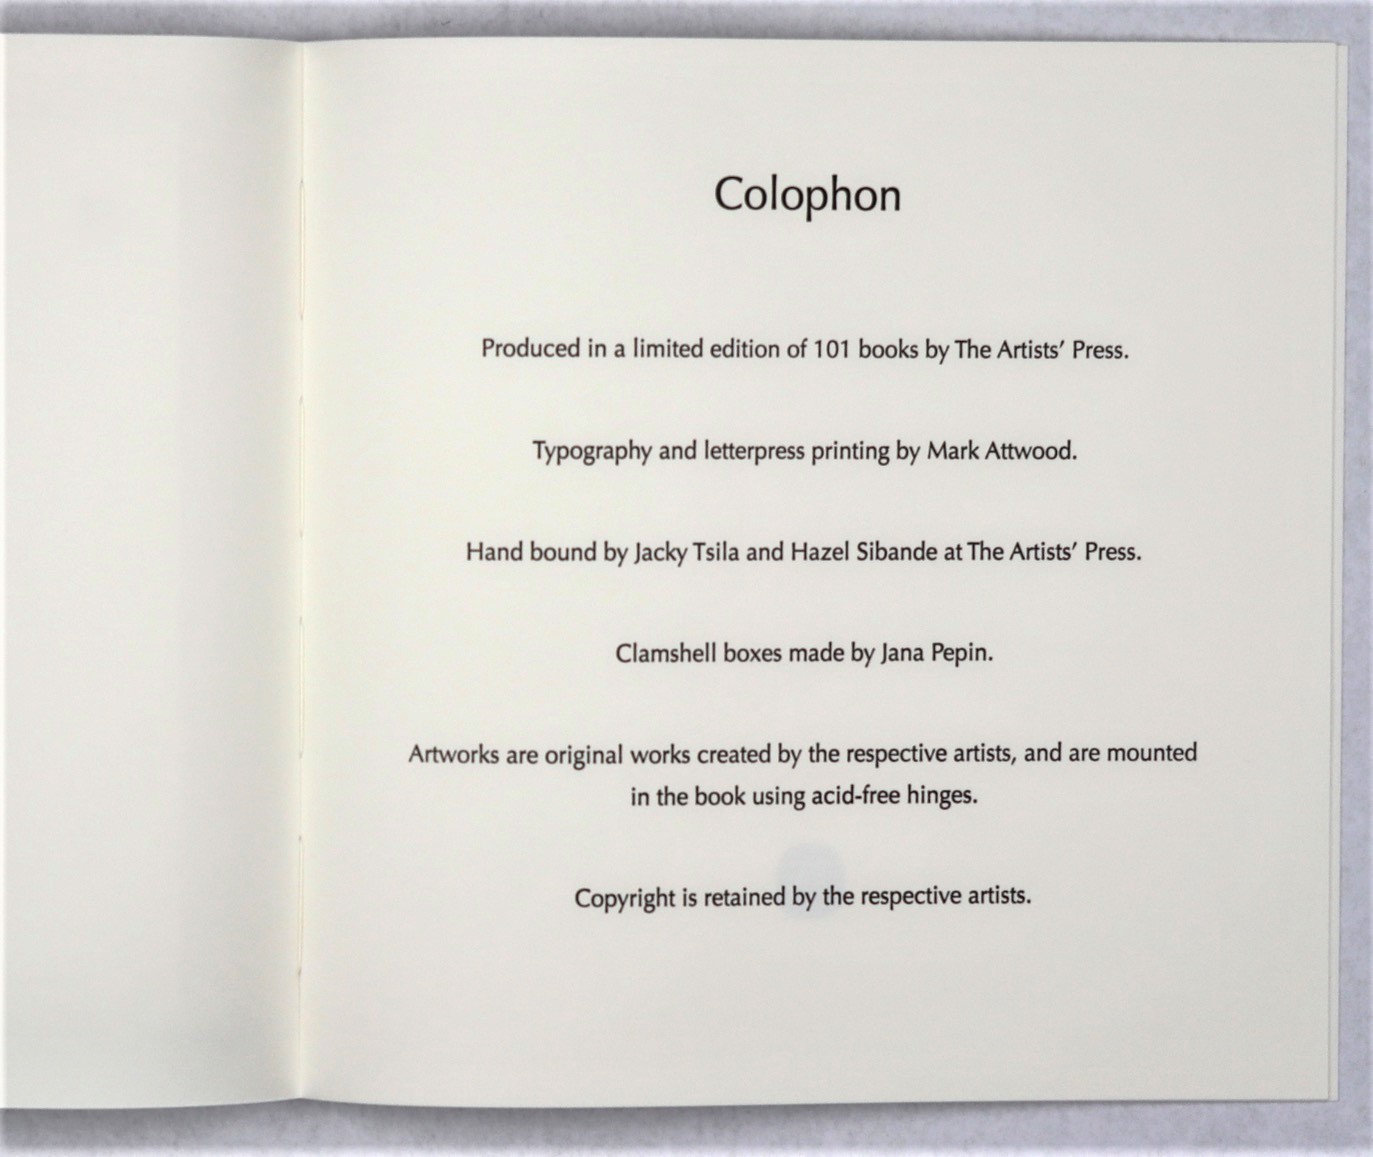 Click the image for a view of: Colophon